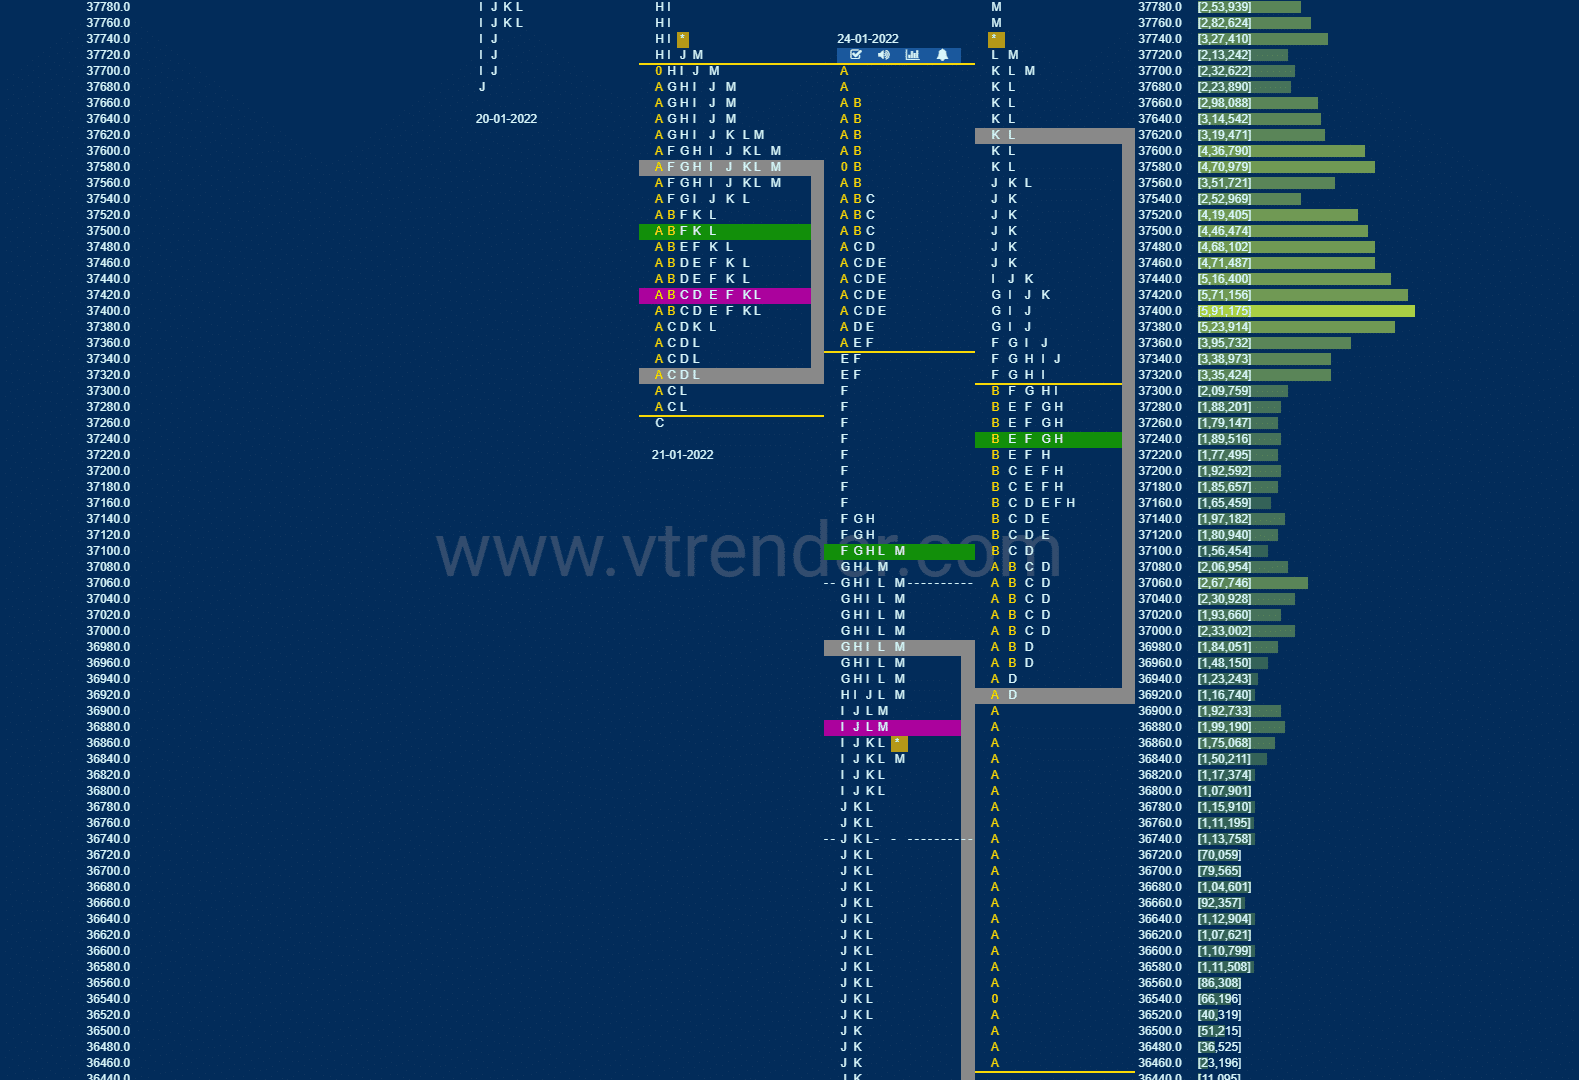 Bnf 17 Market Profile Analysis Dated 25Th January 2022 Banknifty Futures, Charts, Day Trading, Intraday Trading, Intraday Trading Strategies, Market Profile, Market Profile Trading Strategies, Nifty Futures, Order Flow Analysis, Support And Resistance, Technical Analysis, Trading Strategies, Volume Profile Trading